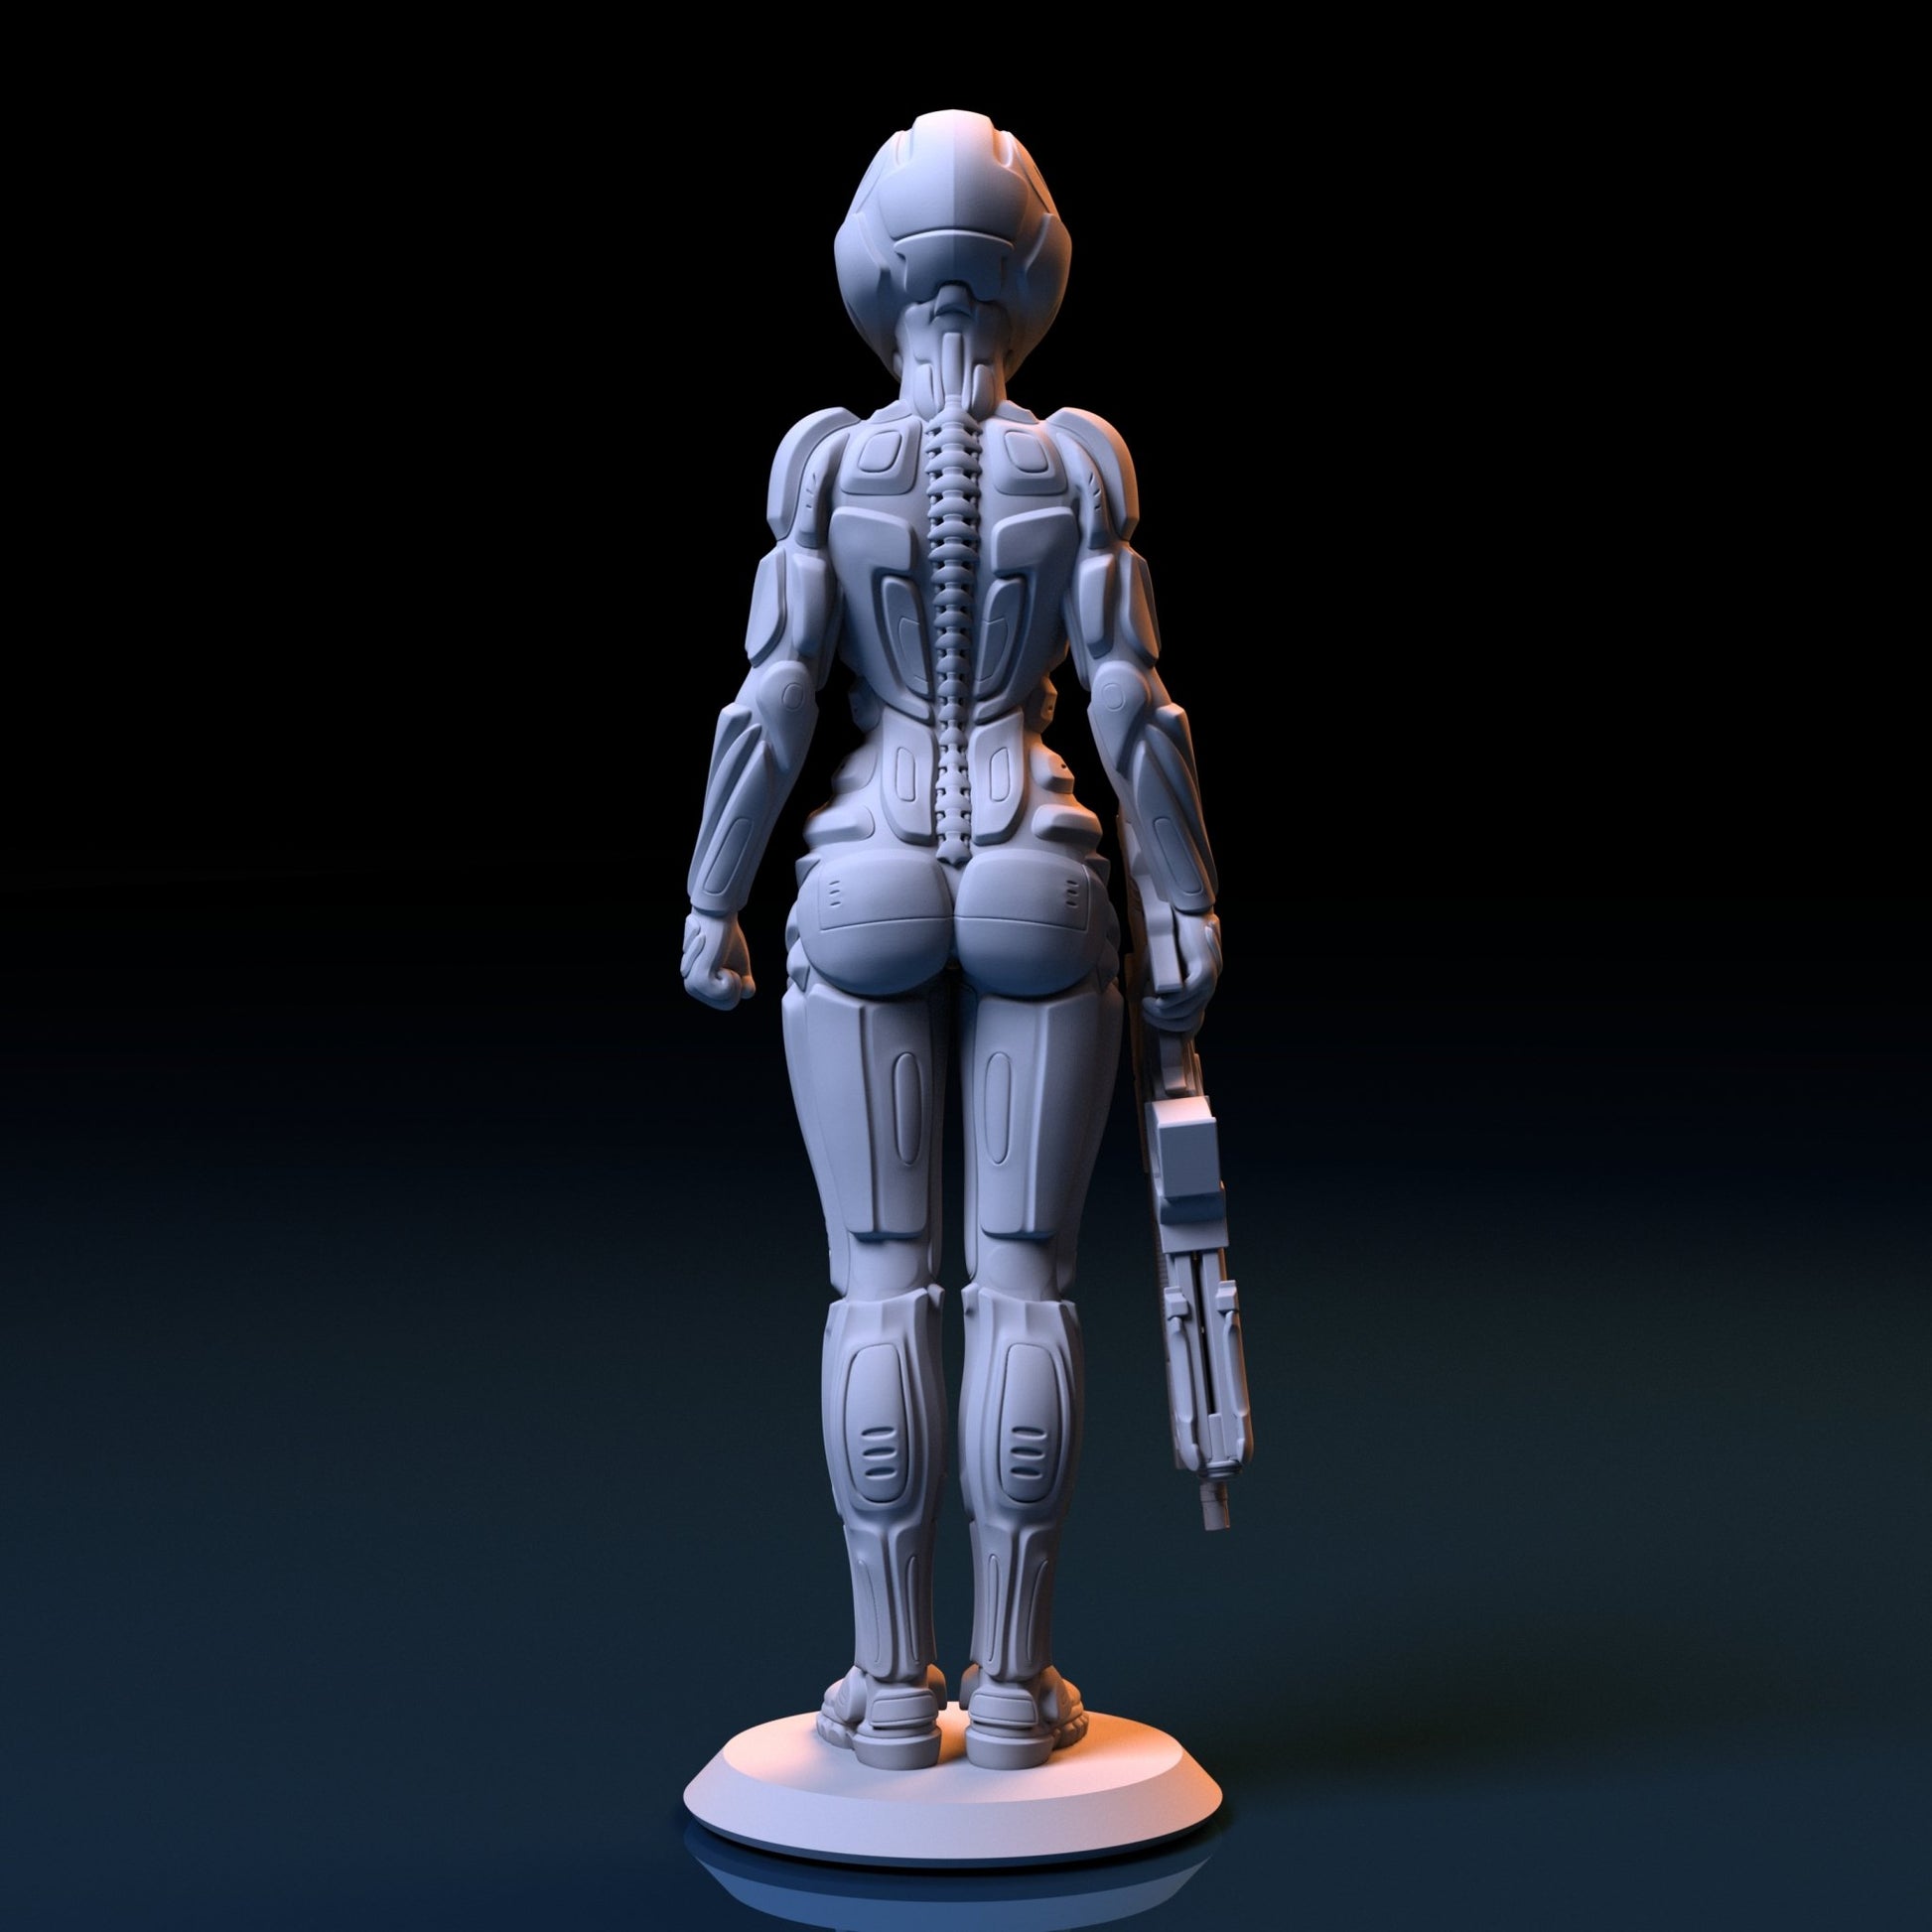 Space Force Girl 3D Printed Figurine Fanart Unpainted Scale Models